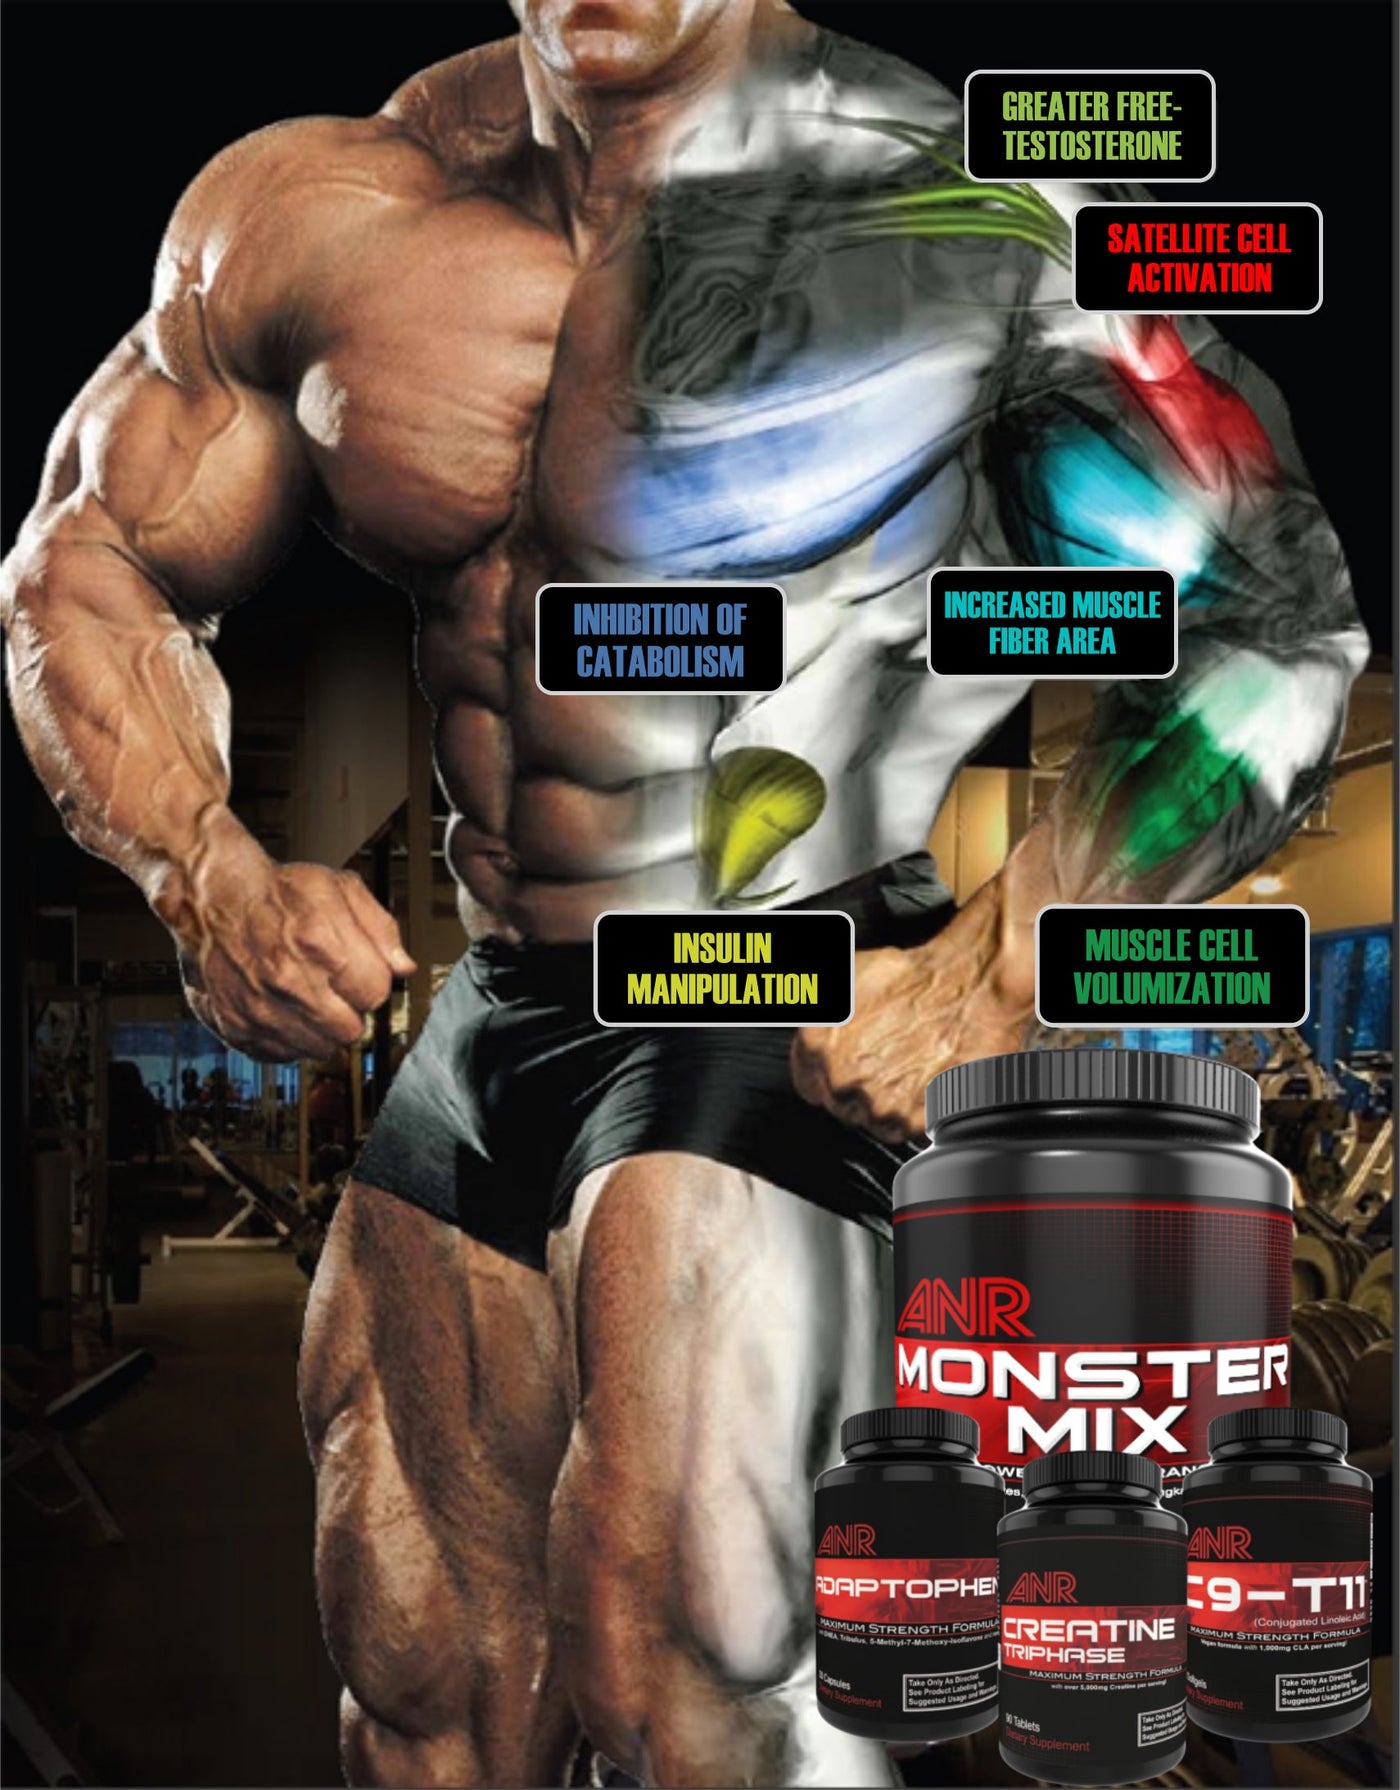 Monster Muscle-Building Stack 2.0 - TeamANR